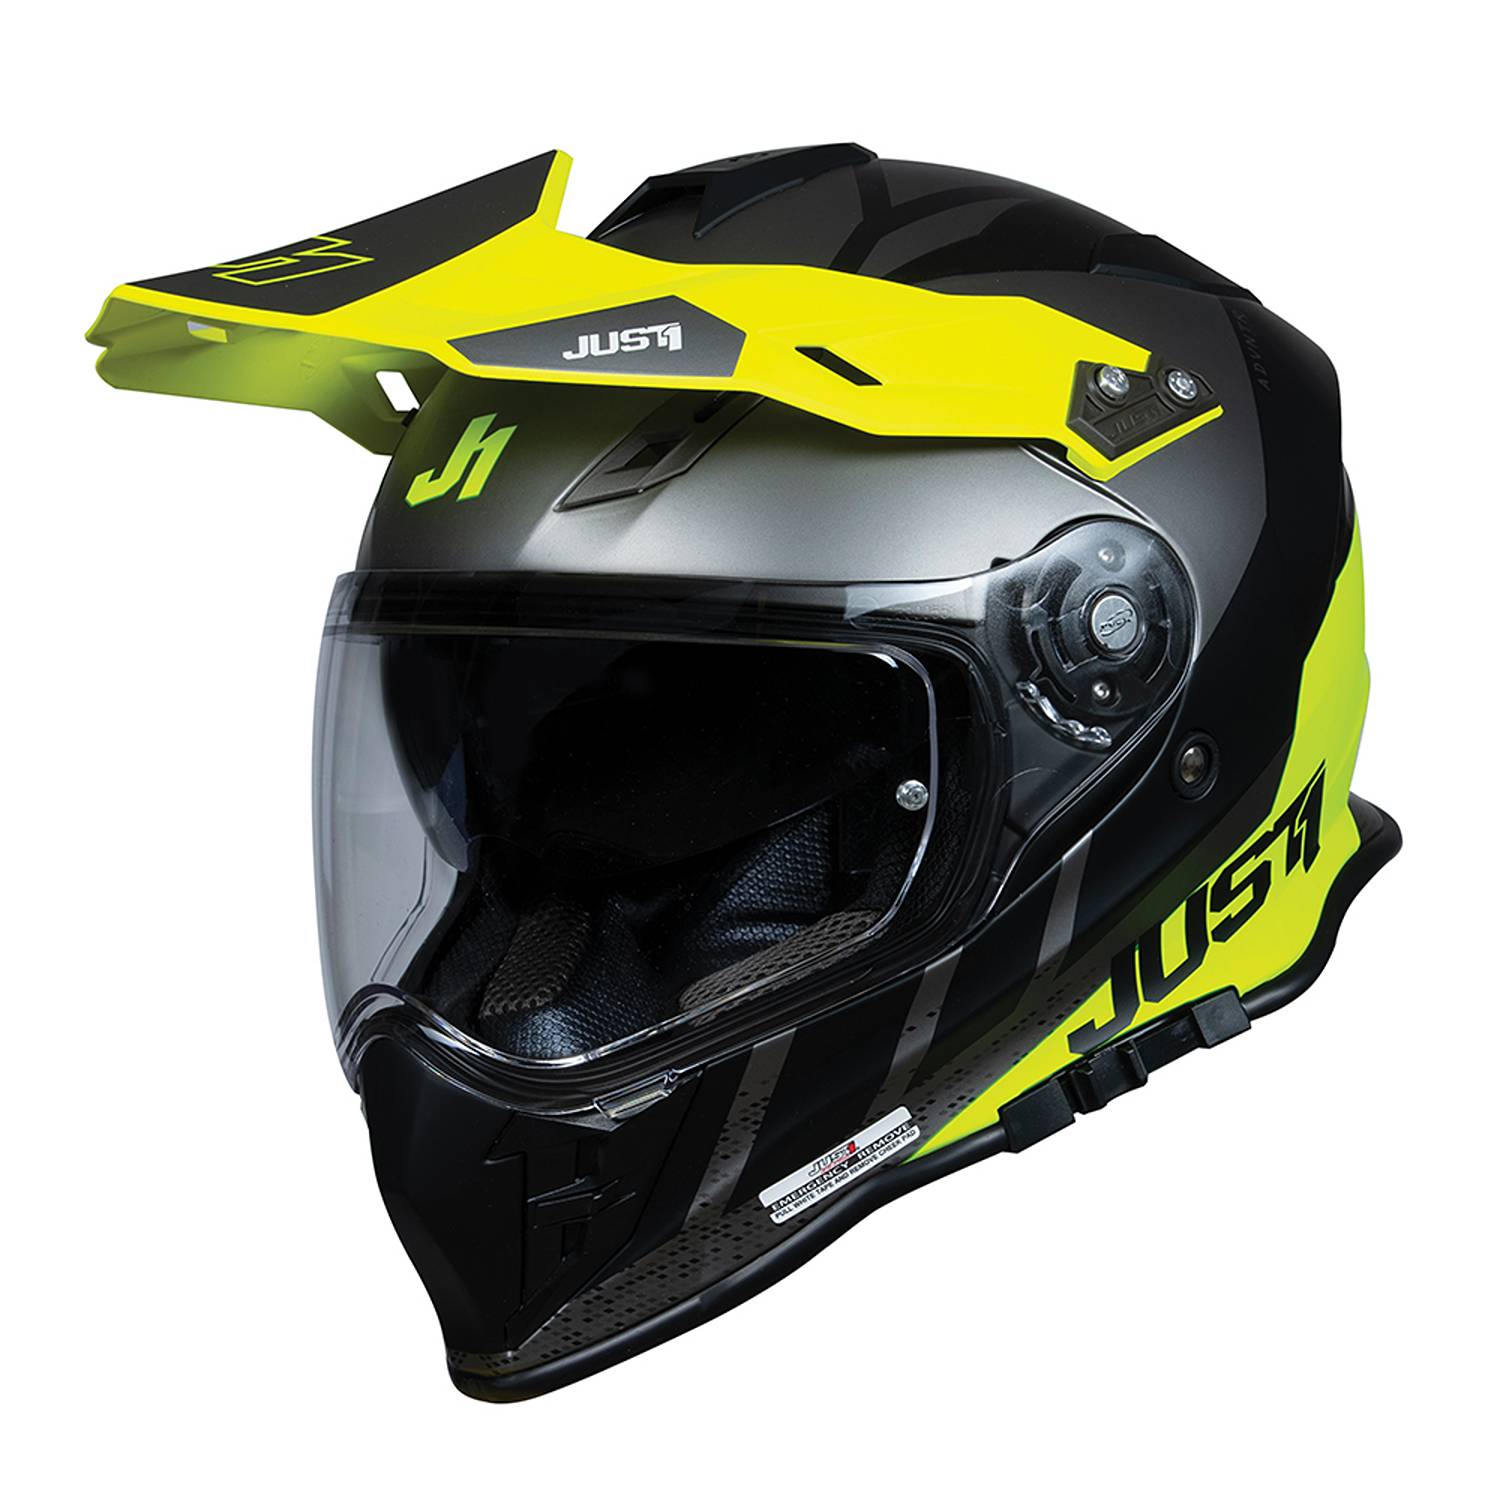 Image of Just1 J34 Pro Outerspace Jaune Vert Titane Aventure Casques Taille M